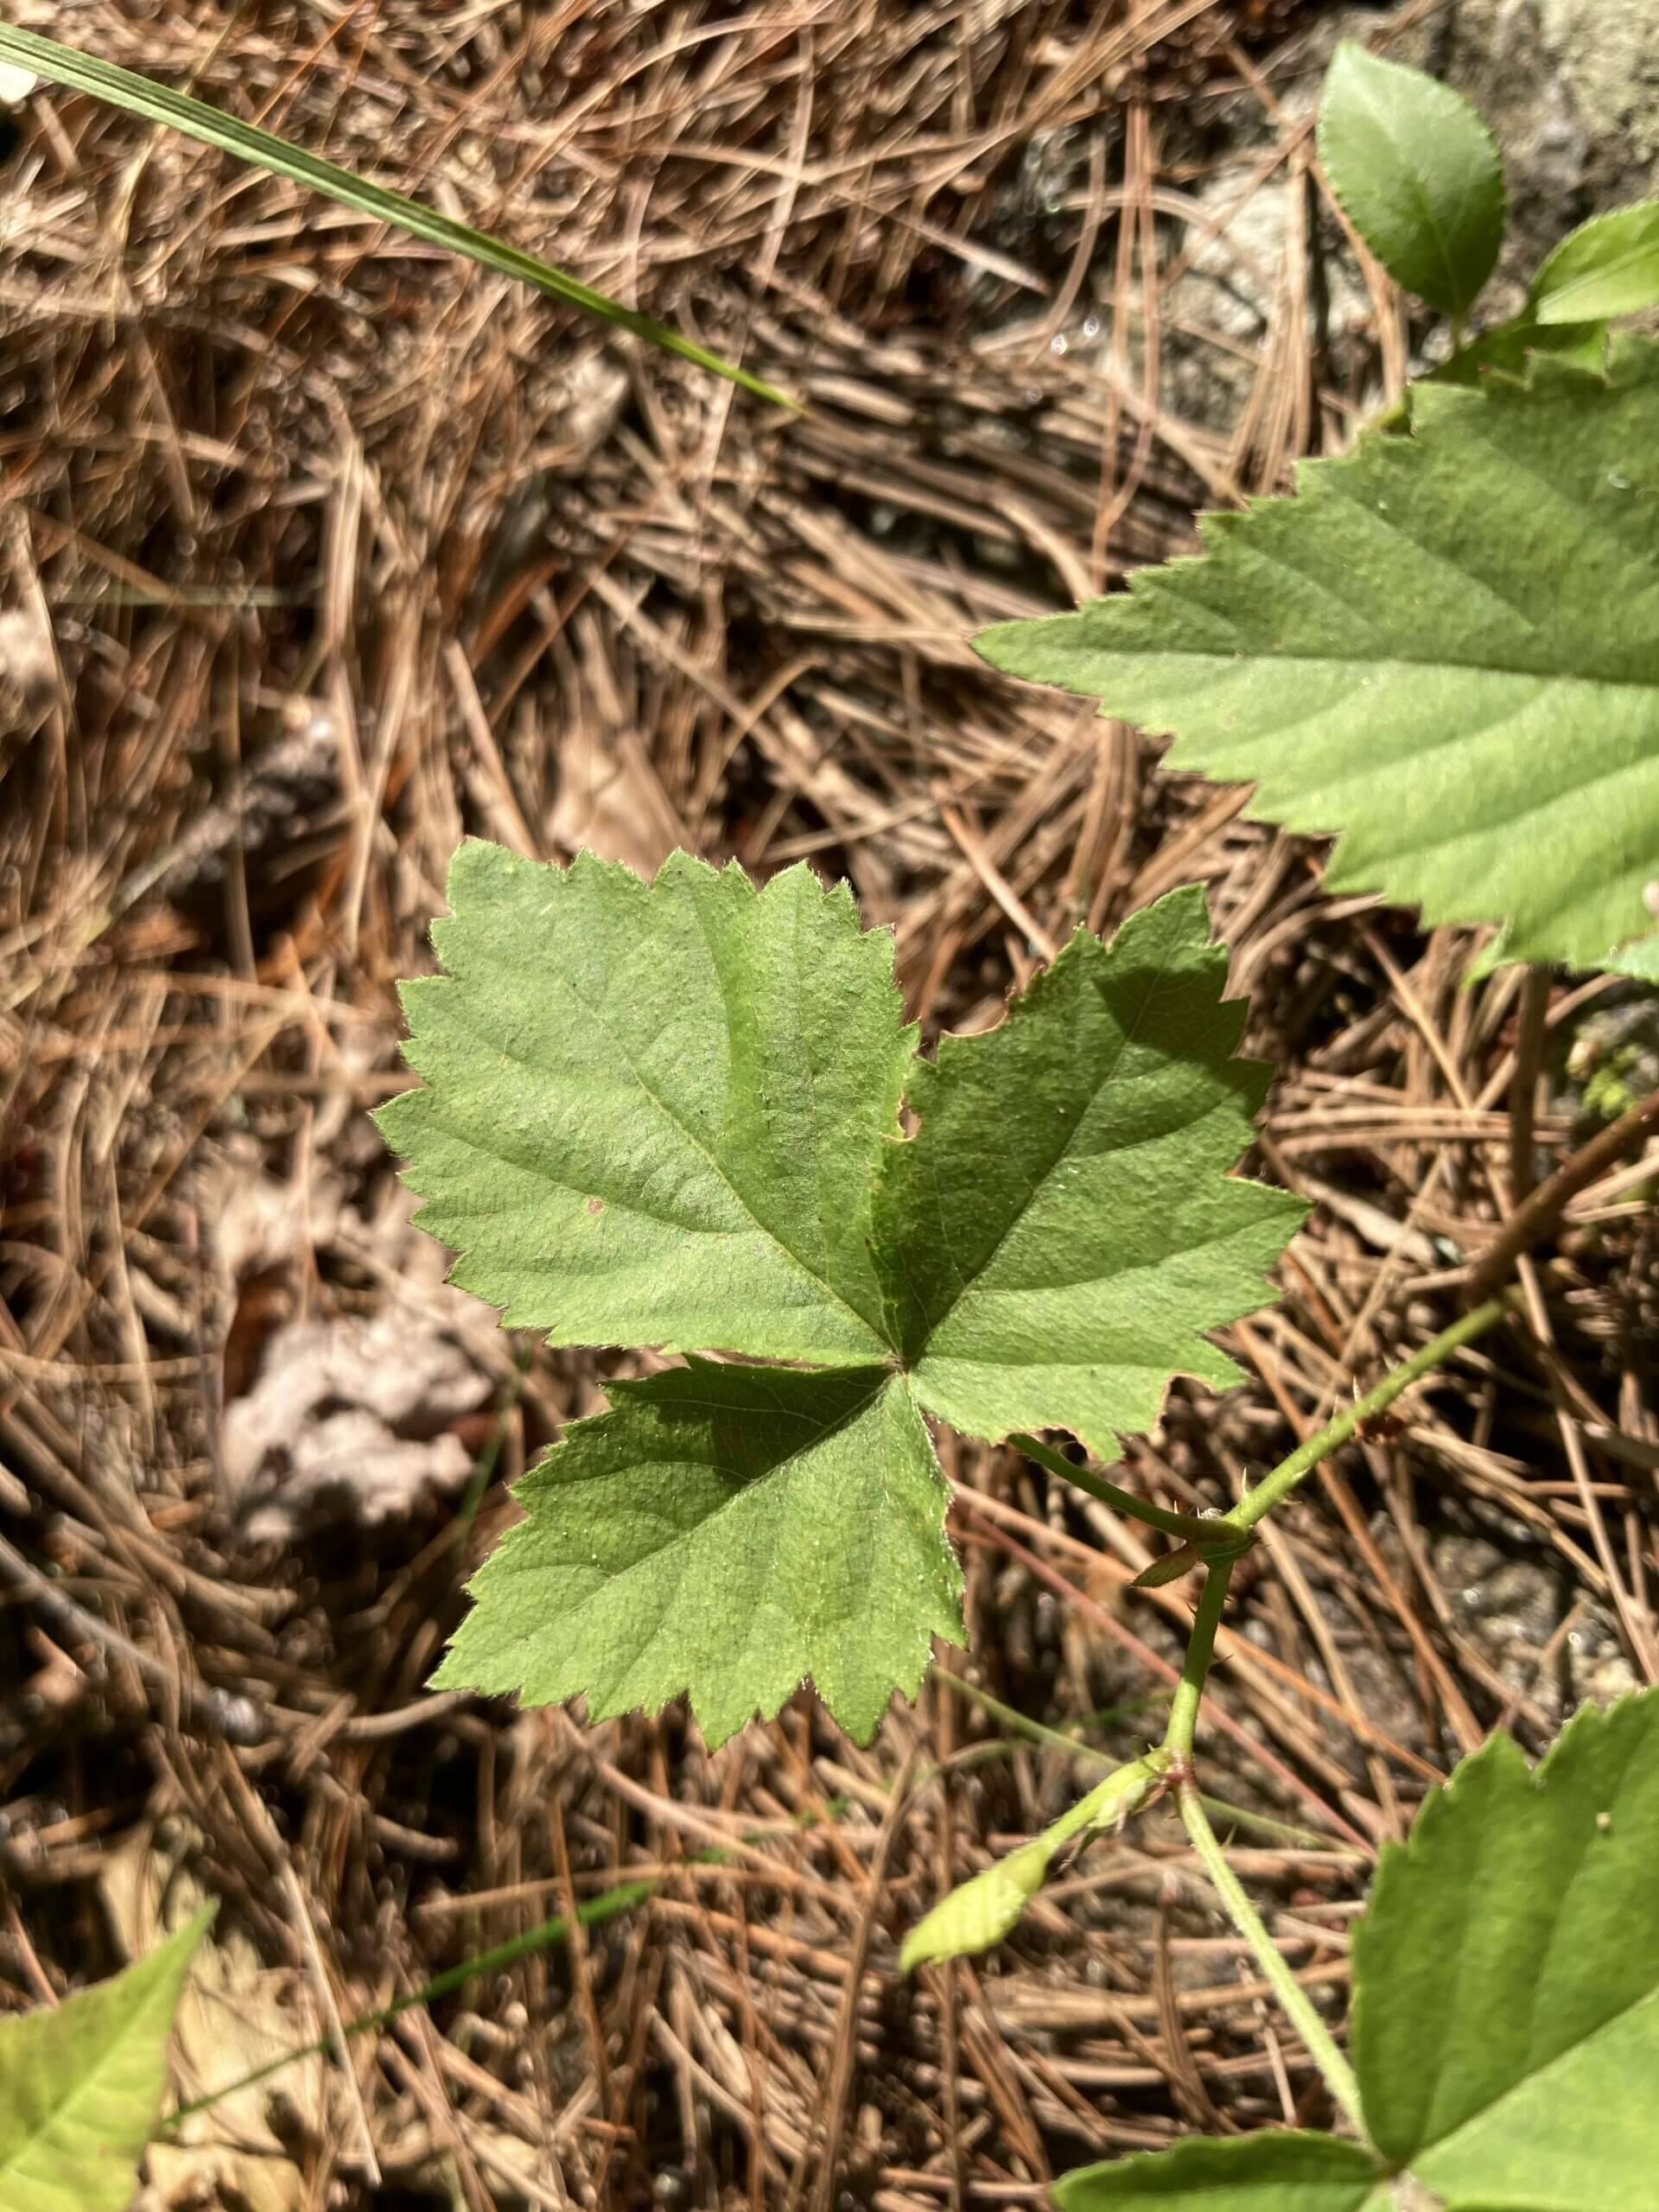 Poison ivy seems to thrive under climate change : Shots - Health News : NPR